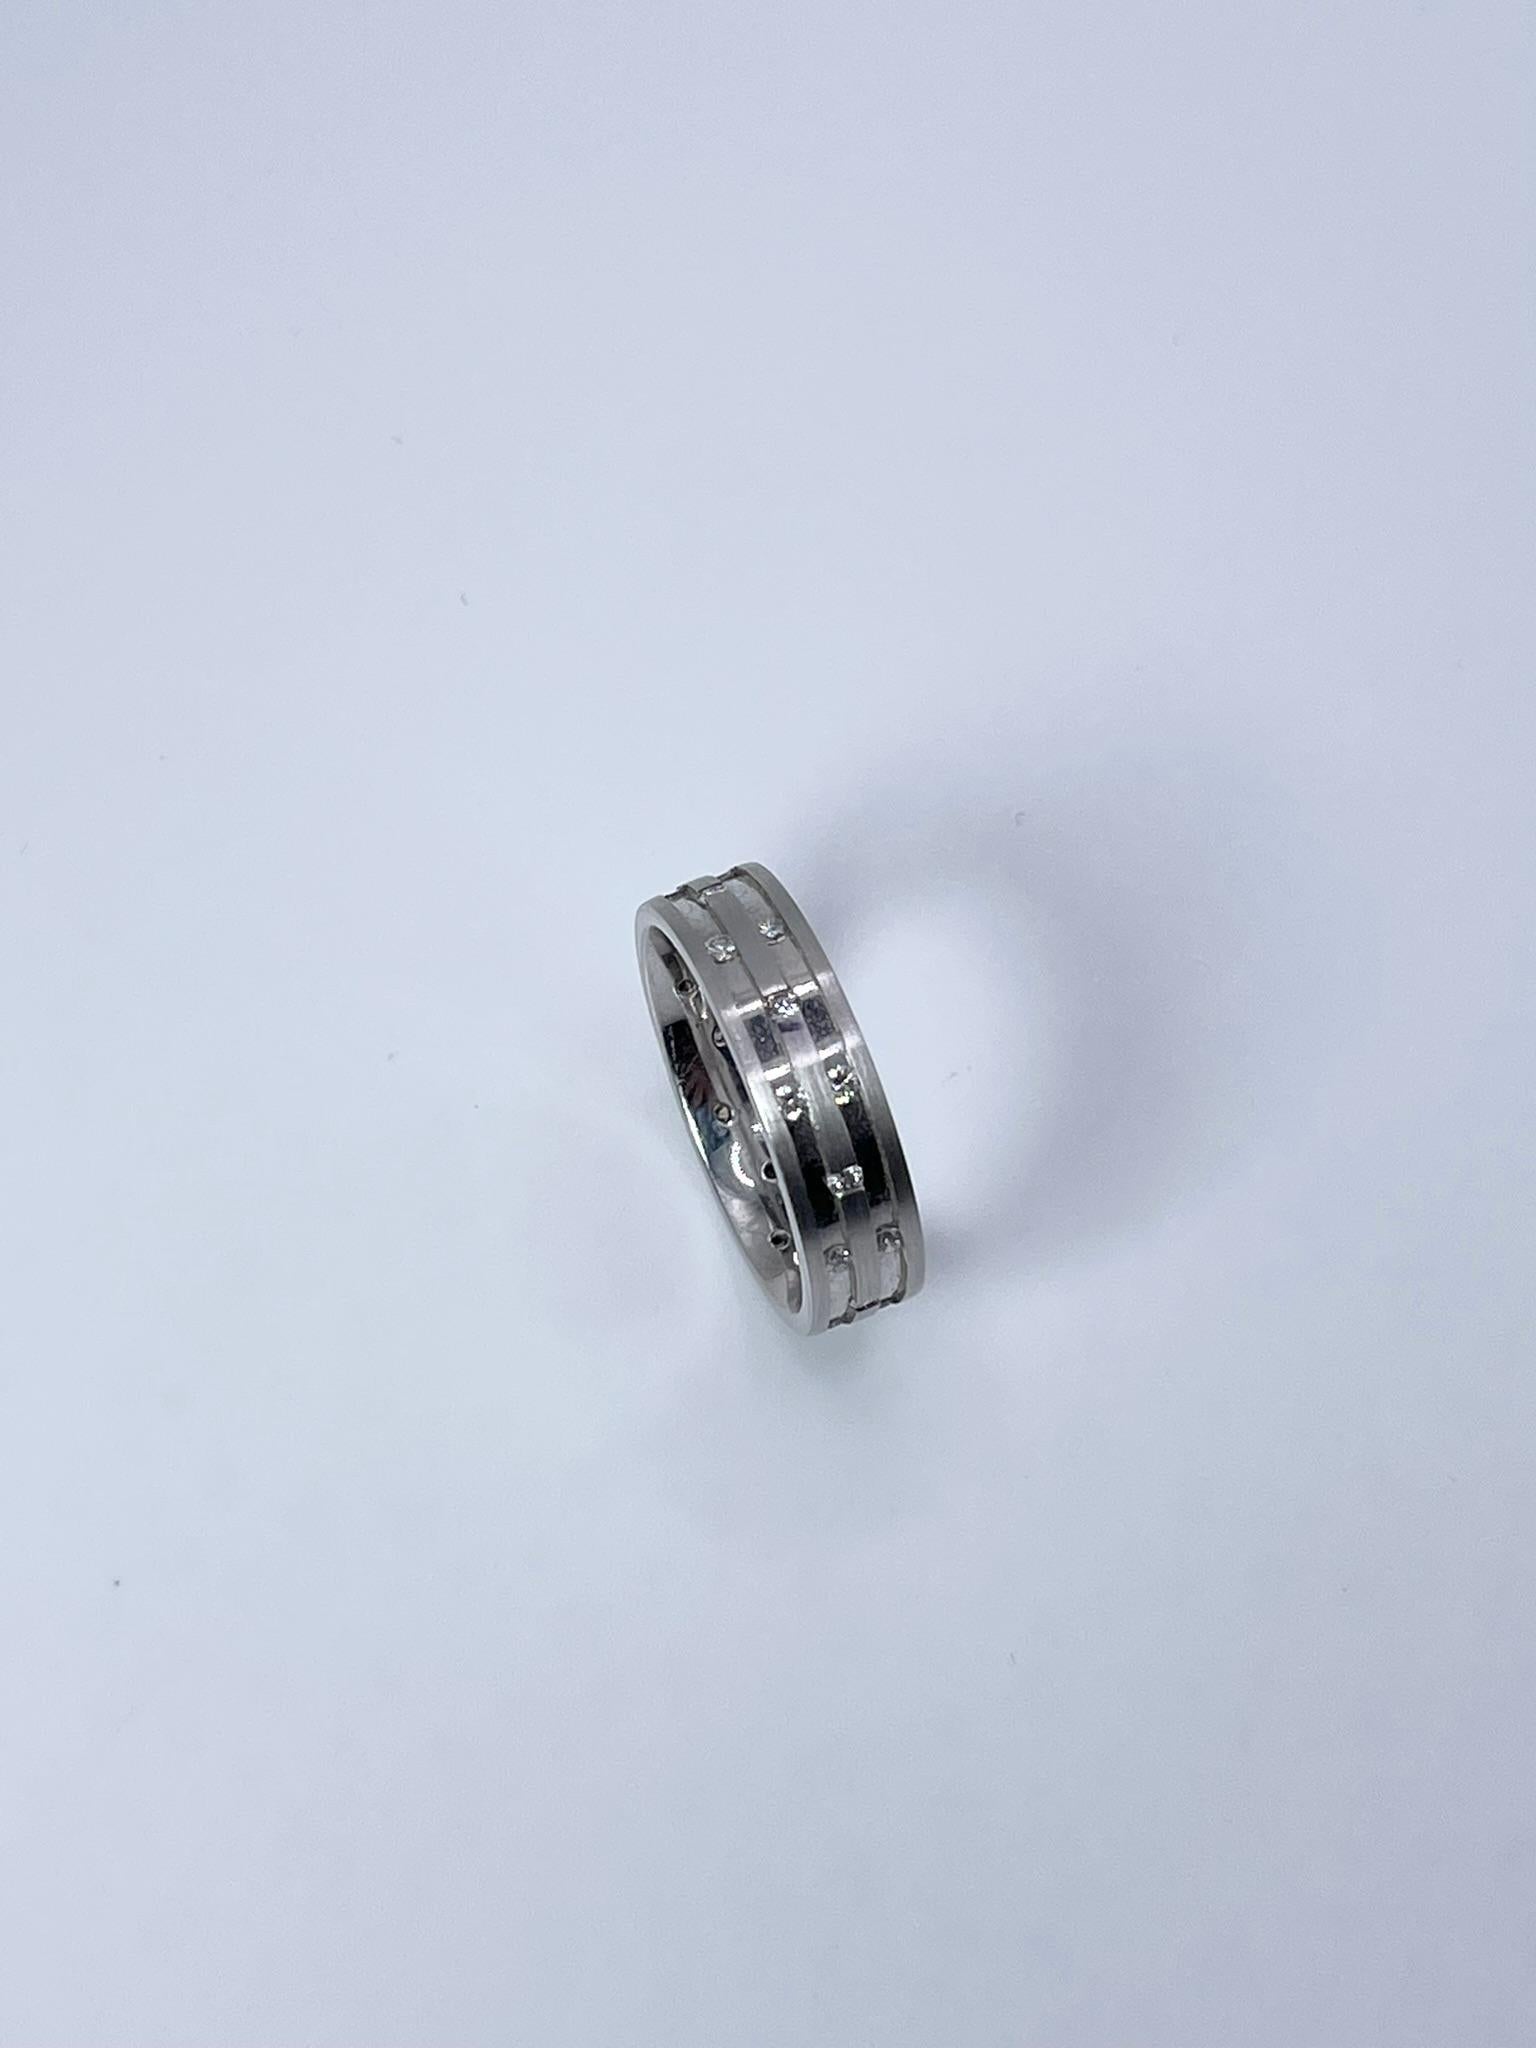 Diamond ring made in platinum with natural diamonds and geometric design!

GRAM WEIGHT: 2.00gr
METAL: platinum

NATURAL DIAMOND(S)
Cut: 
Round Brilliant
Color: F-G
Clarity: SI 
Carat: 1.25ct
Size: 6 ( can be re-sized)


WHAT YOU GET AT STAMPAR